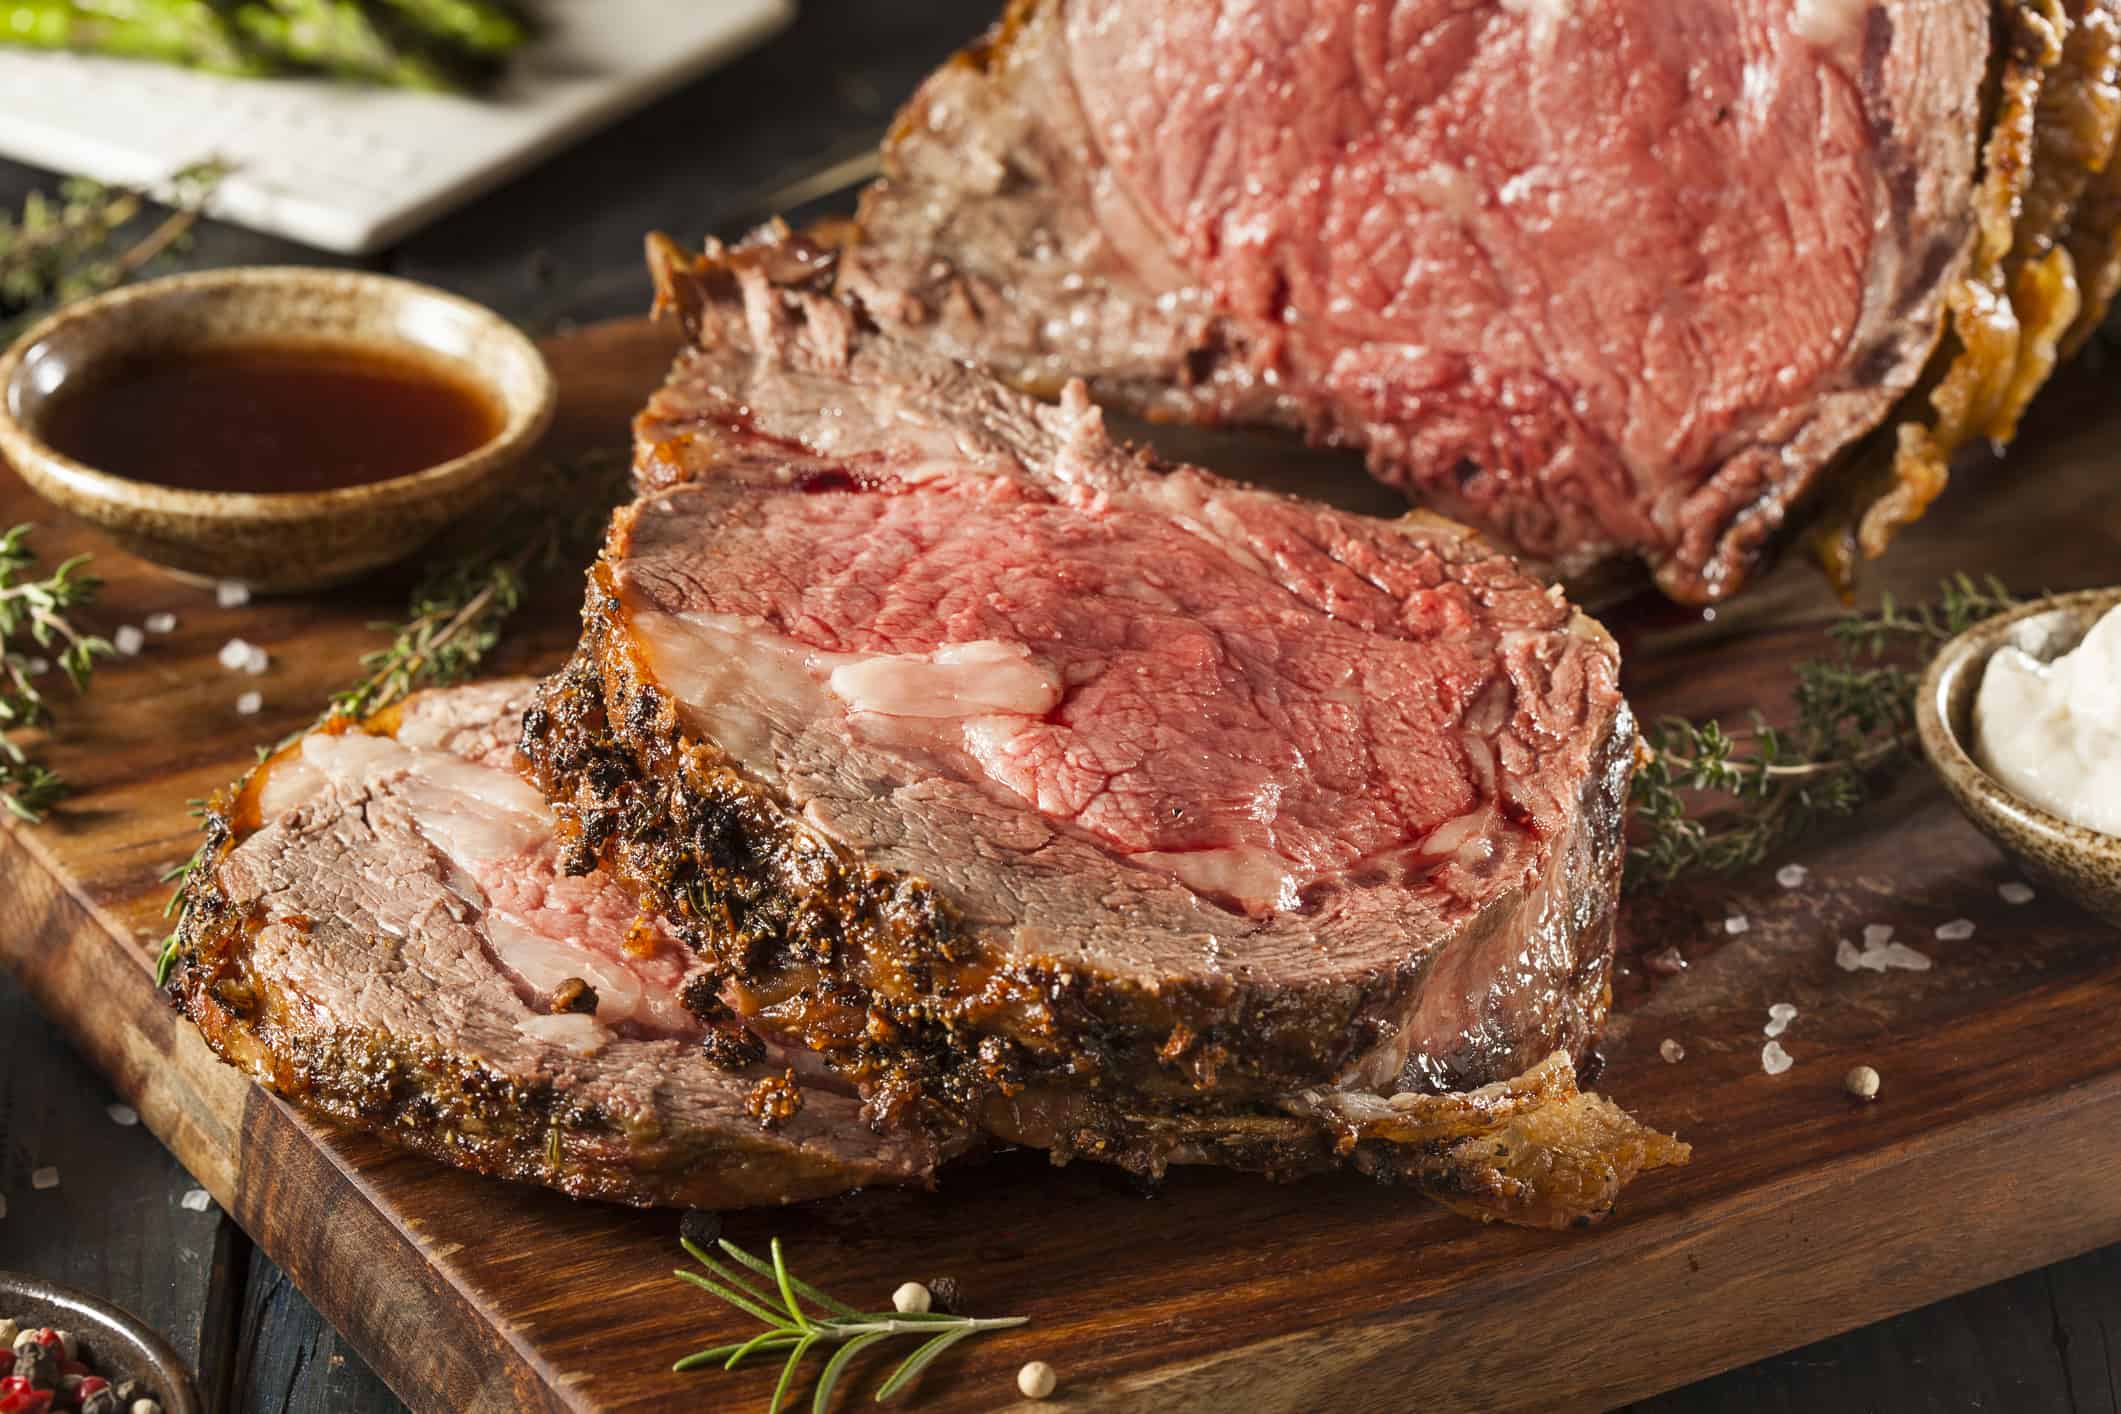 A Very Simple, But Oh So Special Meal - Prime Rib With Au Jus || Worthing Court